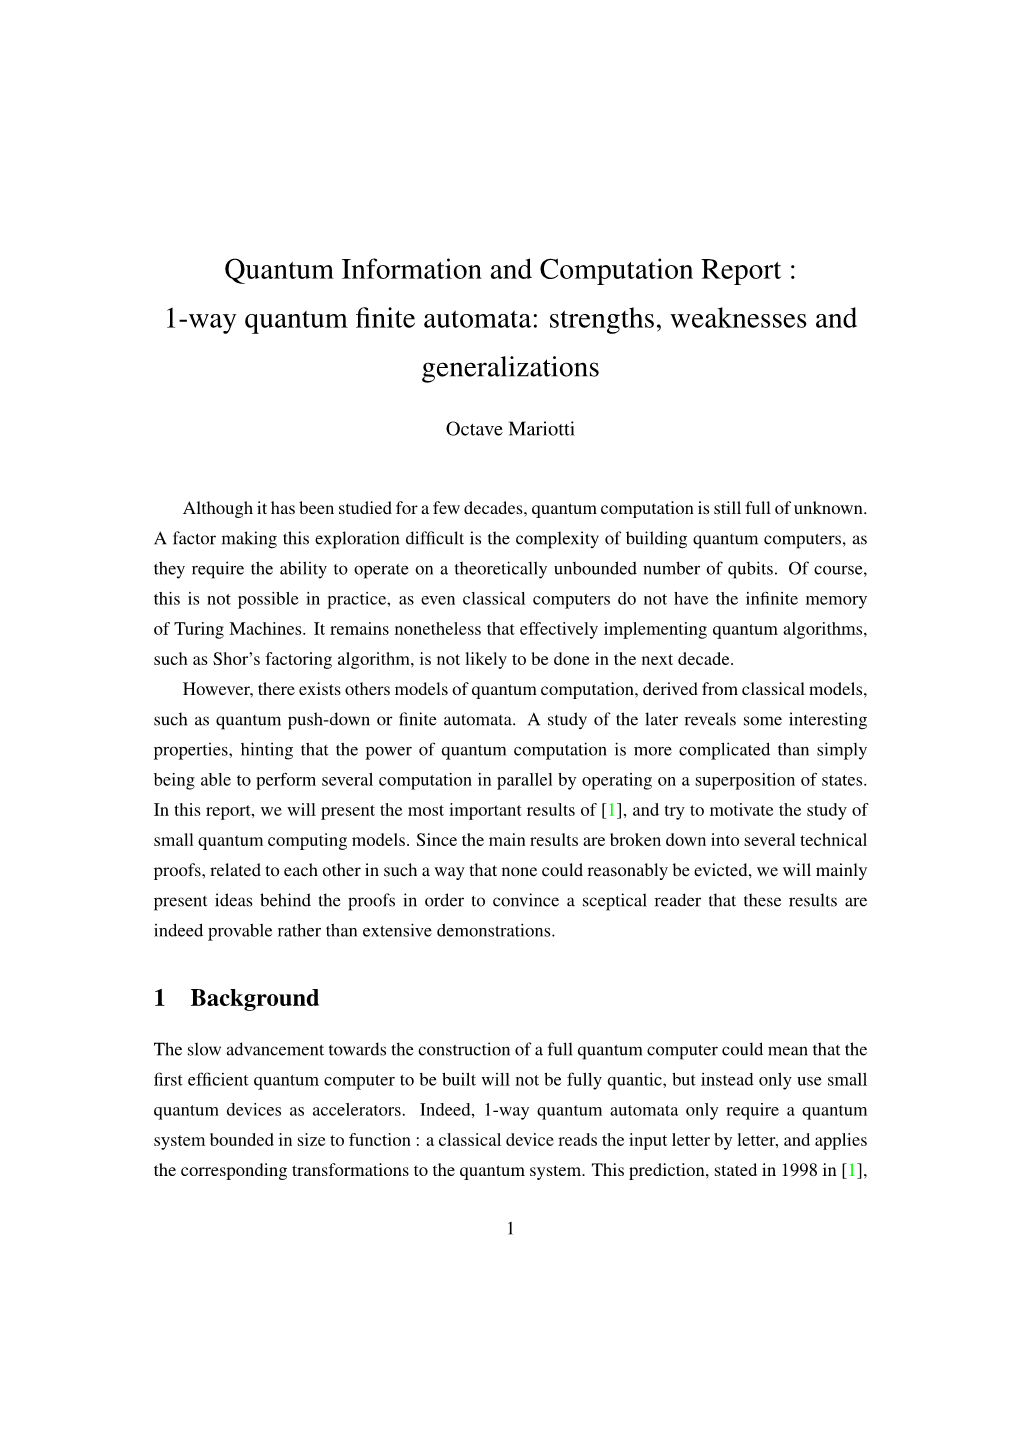 Quantum Information and Computation Report : 1-Way Quantum Finite Automata: Strengths, Weaknesses and Generalizations